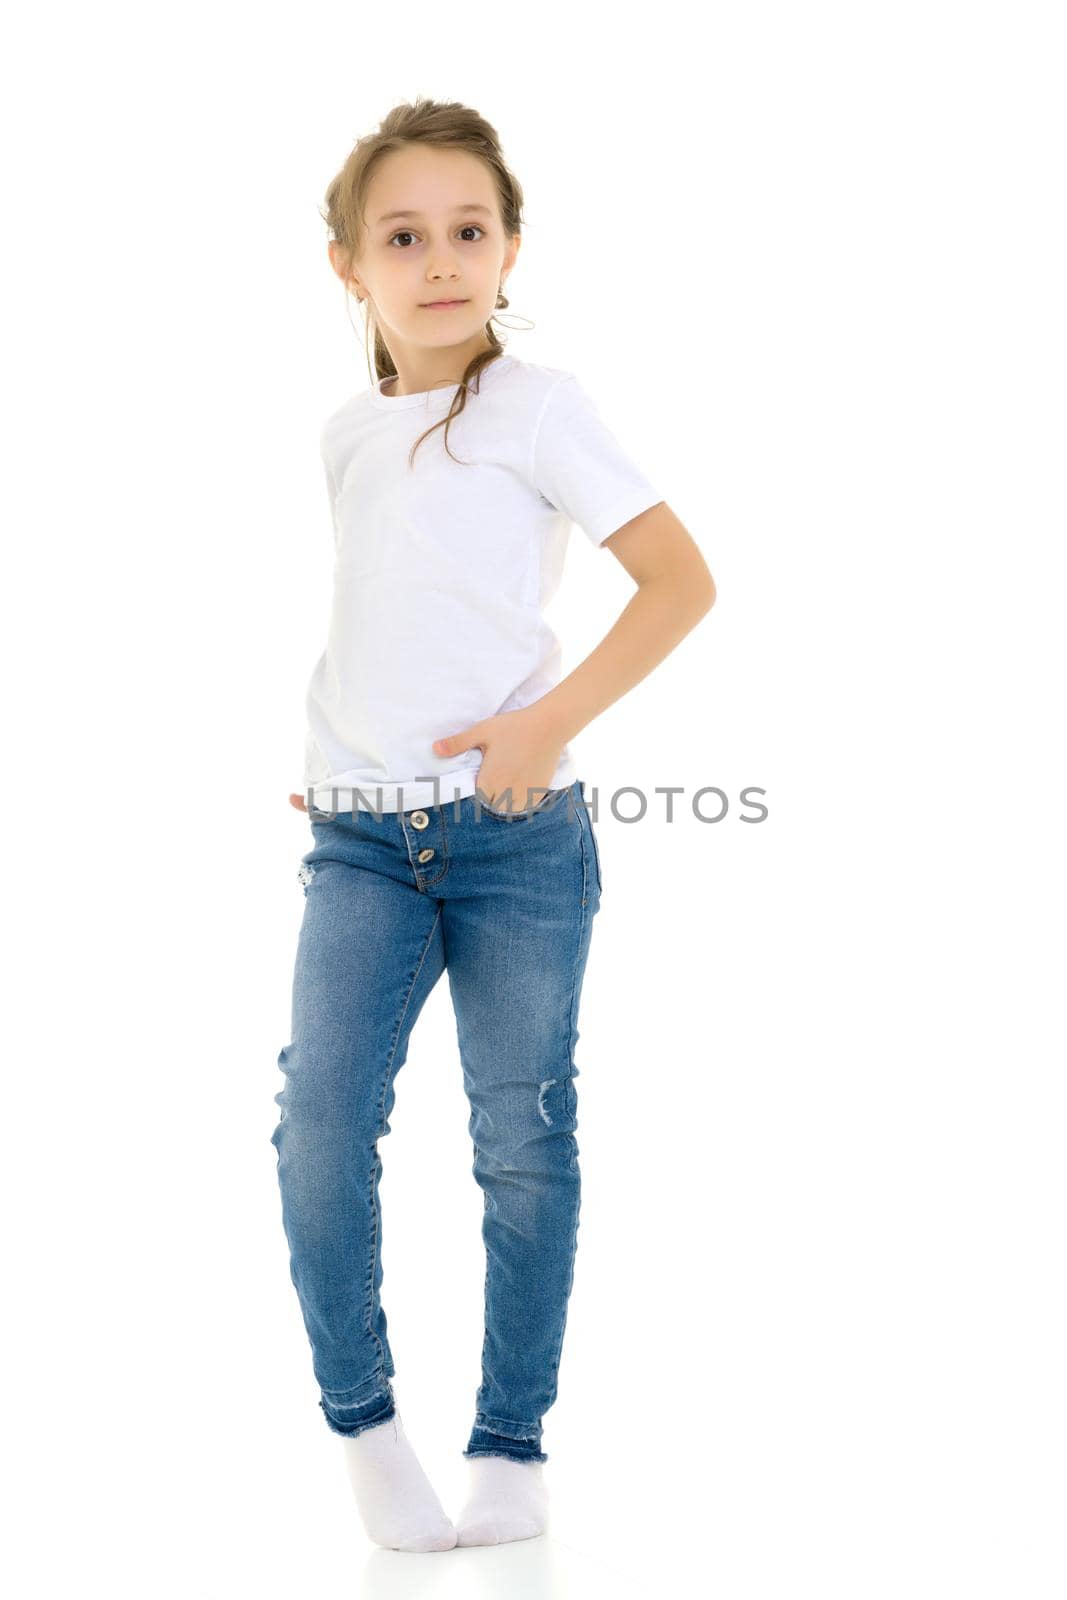 Beautiful Girl Standing with Hands on Her Waist, Cute Child in Blank White Shirt and Blue Jeans Standing Half Turn and Smiling at the Camera, Pretty Girl Posing Against White Studio Background